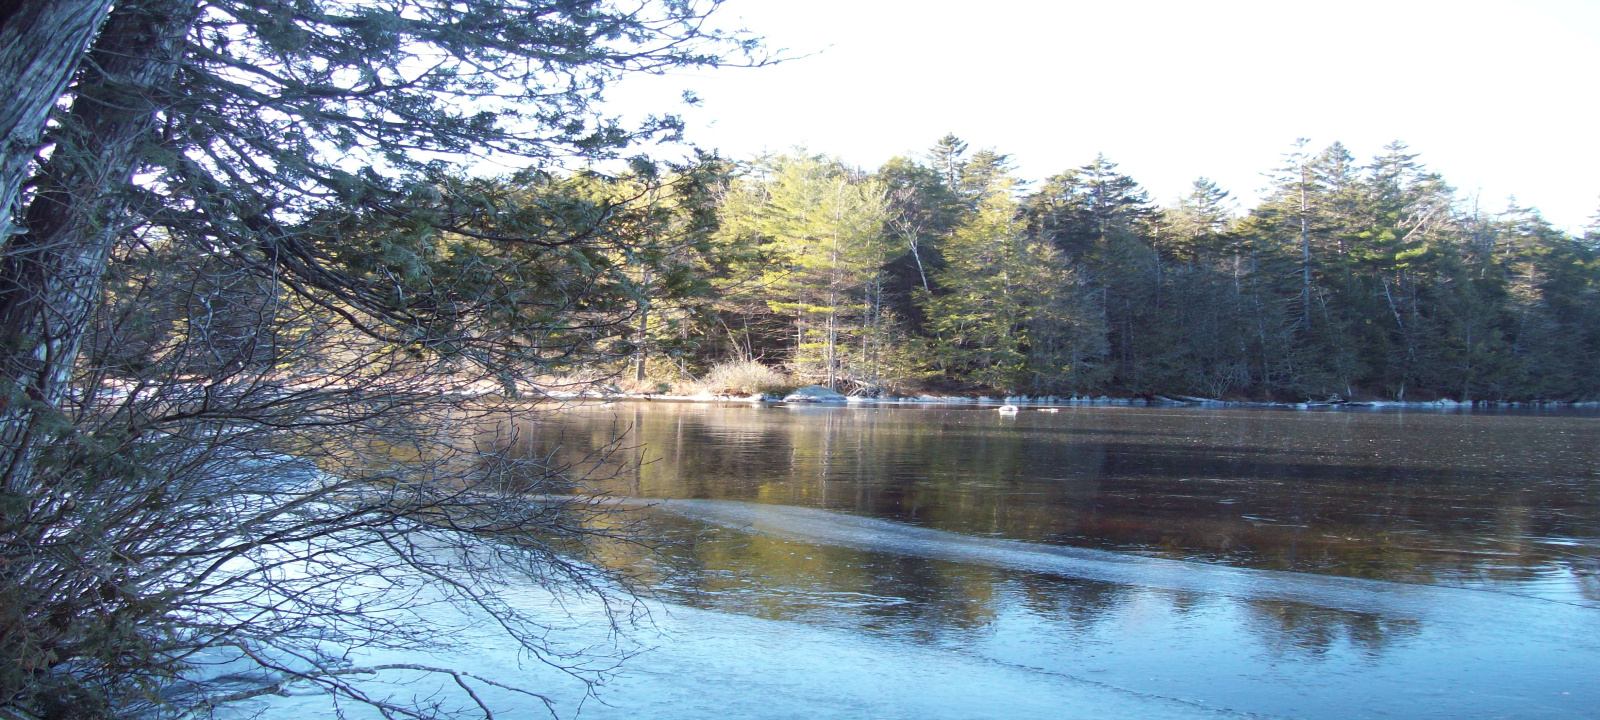 278 Lombard Rd, Lakeville, Maine 04487, 1 Bedroom Bedrooms, 2 Rooms Rooms,Waterfront Camp/House,Active,Lombard,1001